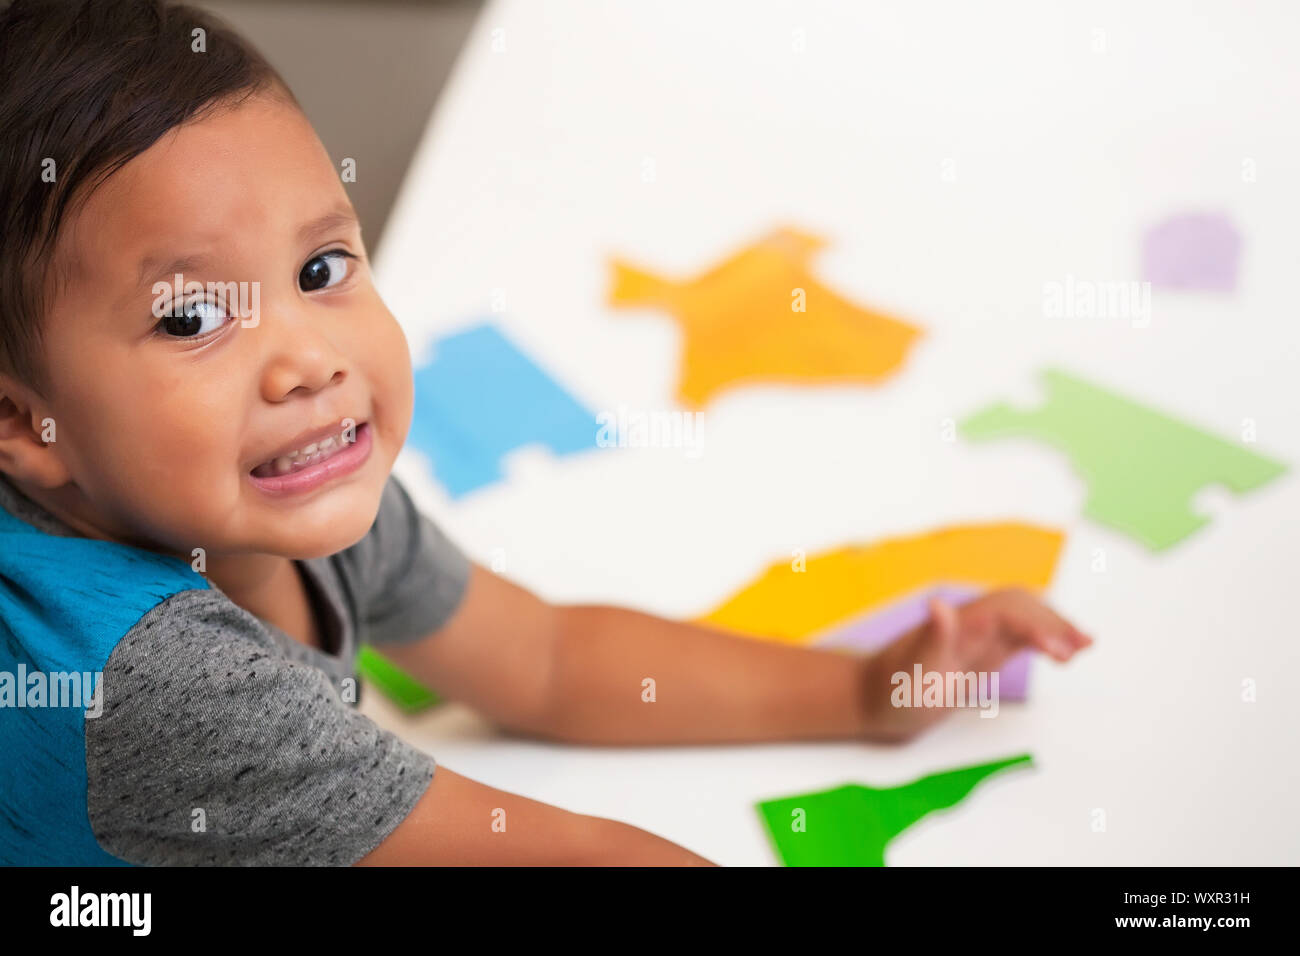 A preschool age young boy  having fun and smiling while playing with manipulative toys on a white table. Stock Photo